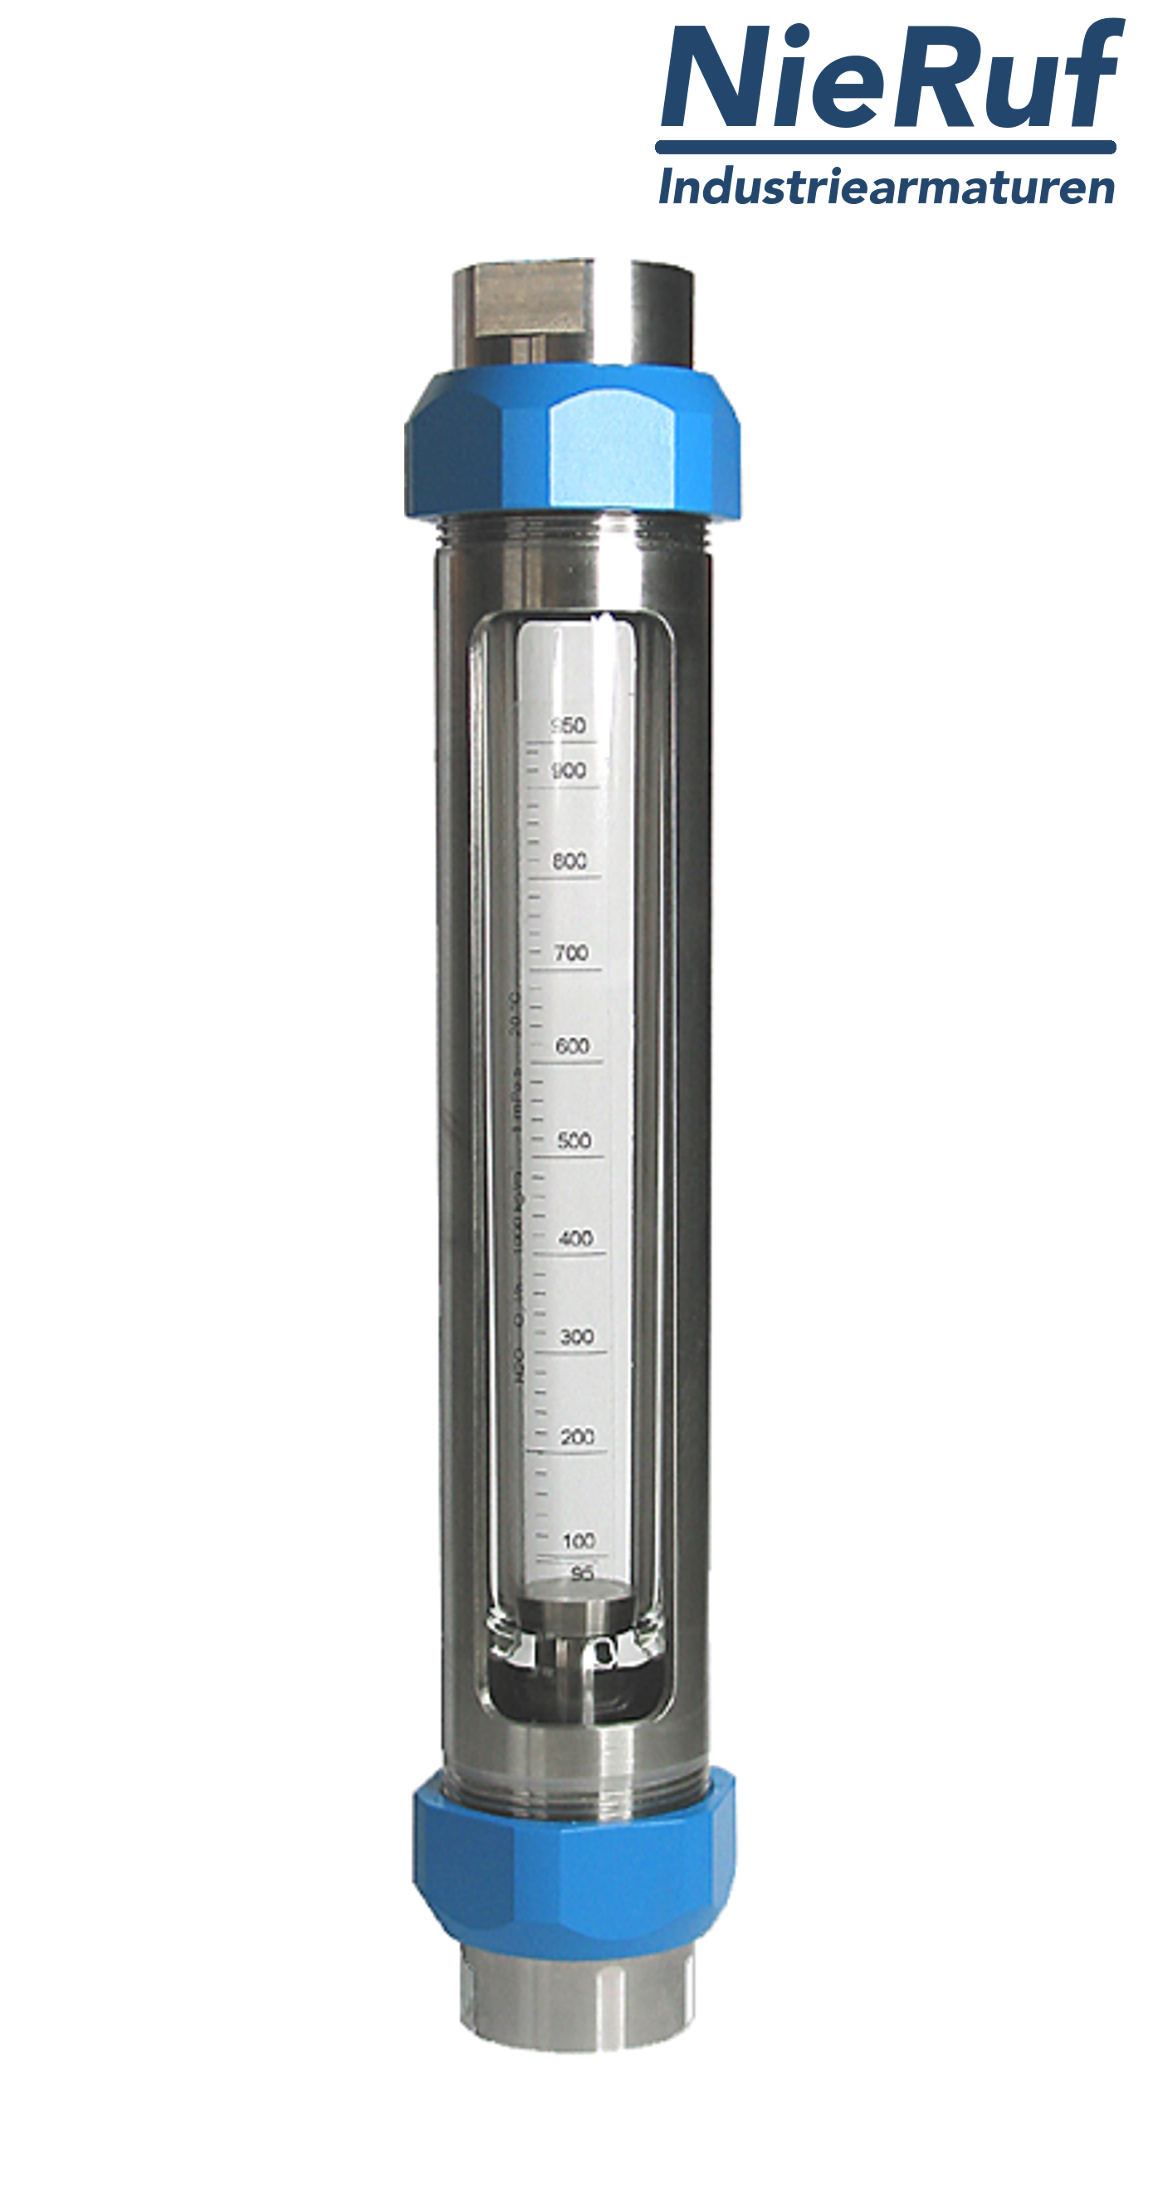 Variable area flowmeter stainless steel + borosilicate 1" Inch 160.0 - 1600 l/h water FKM